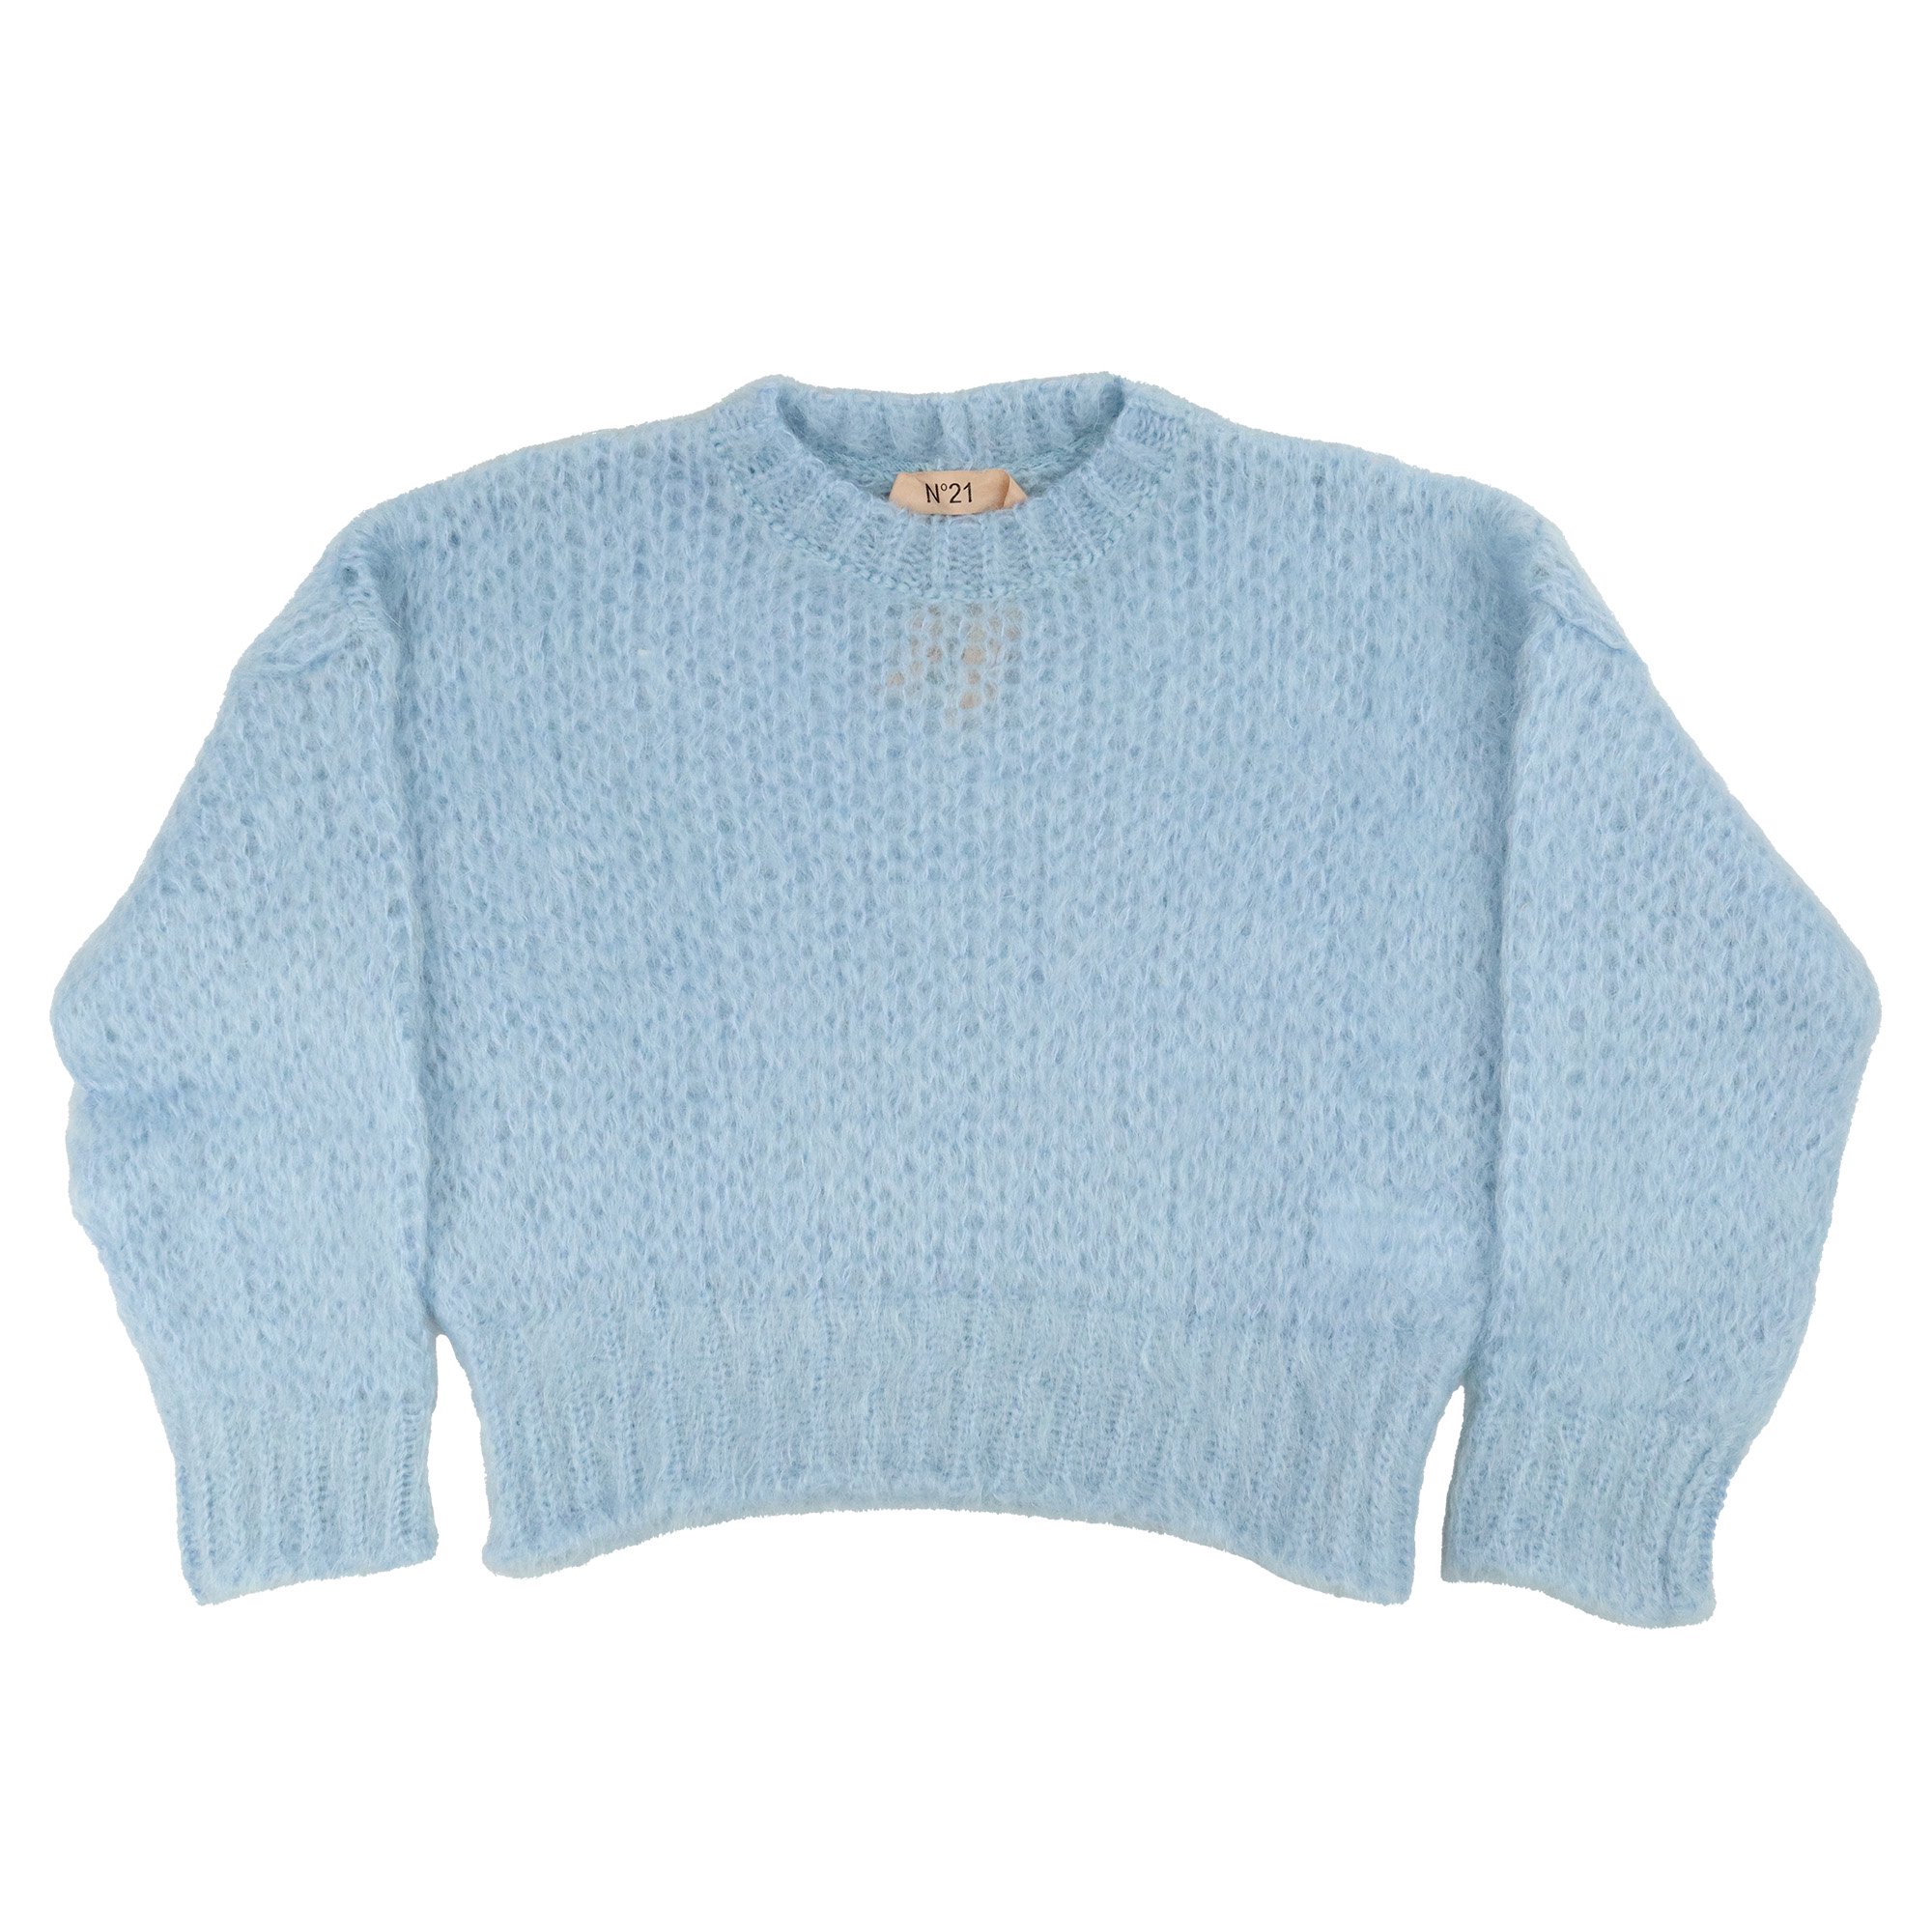 <img class='new_mark_img1' src='https://img.shop-pro.jp/img/new/icons47.gif' style='border:none;display:inline;margin:0px;padding:0px;width:auto;' />N21 MOHAIR KNITBLUE